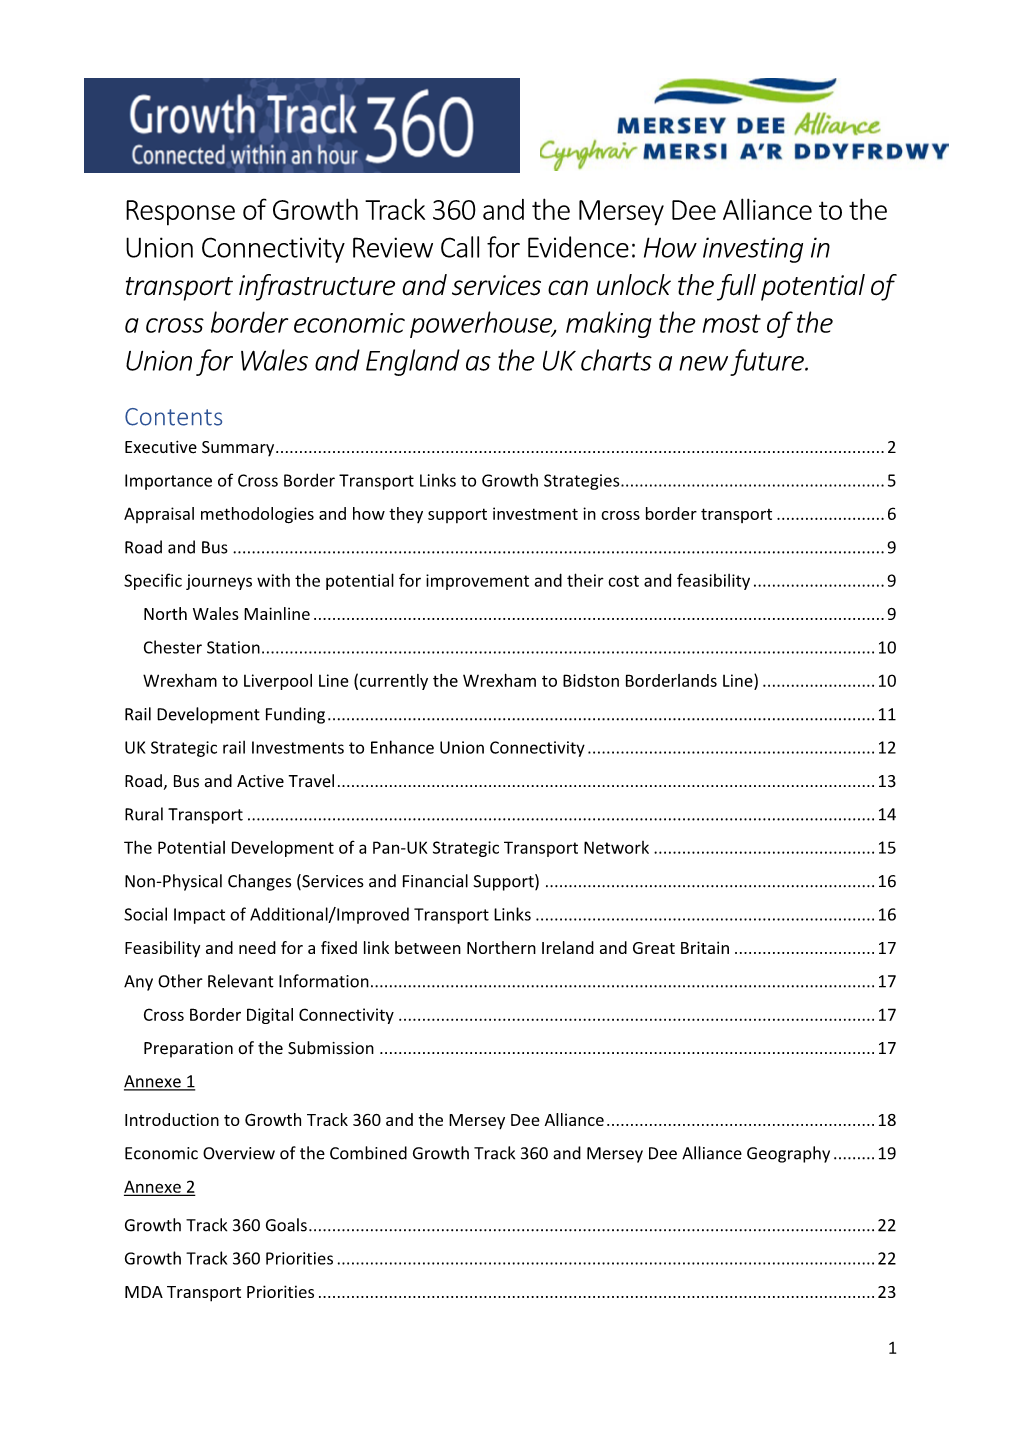 Response of Growth Track 360 and the Mersey Dee Alliance to the Union Connectivity Review Call for Evidence: How Investing in Tr